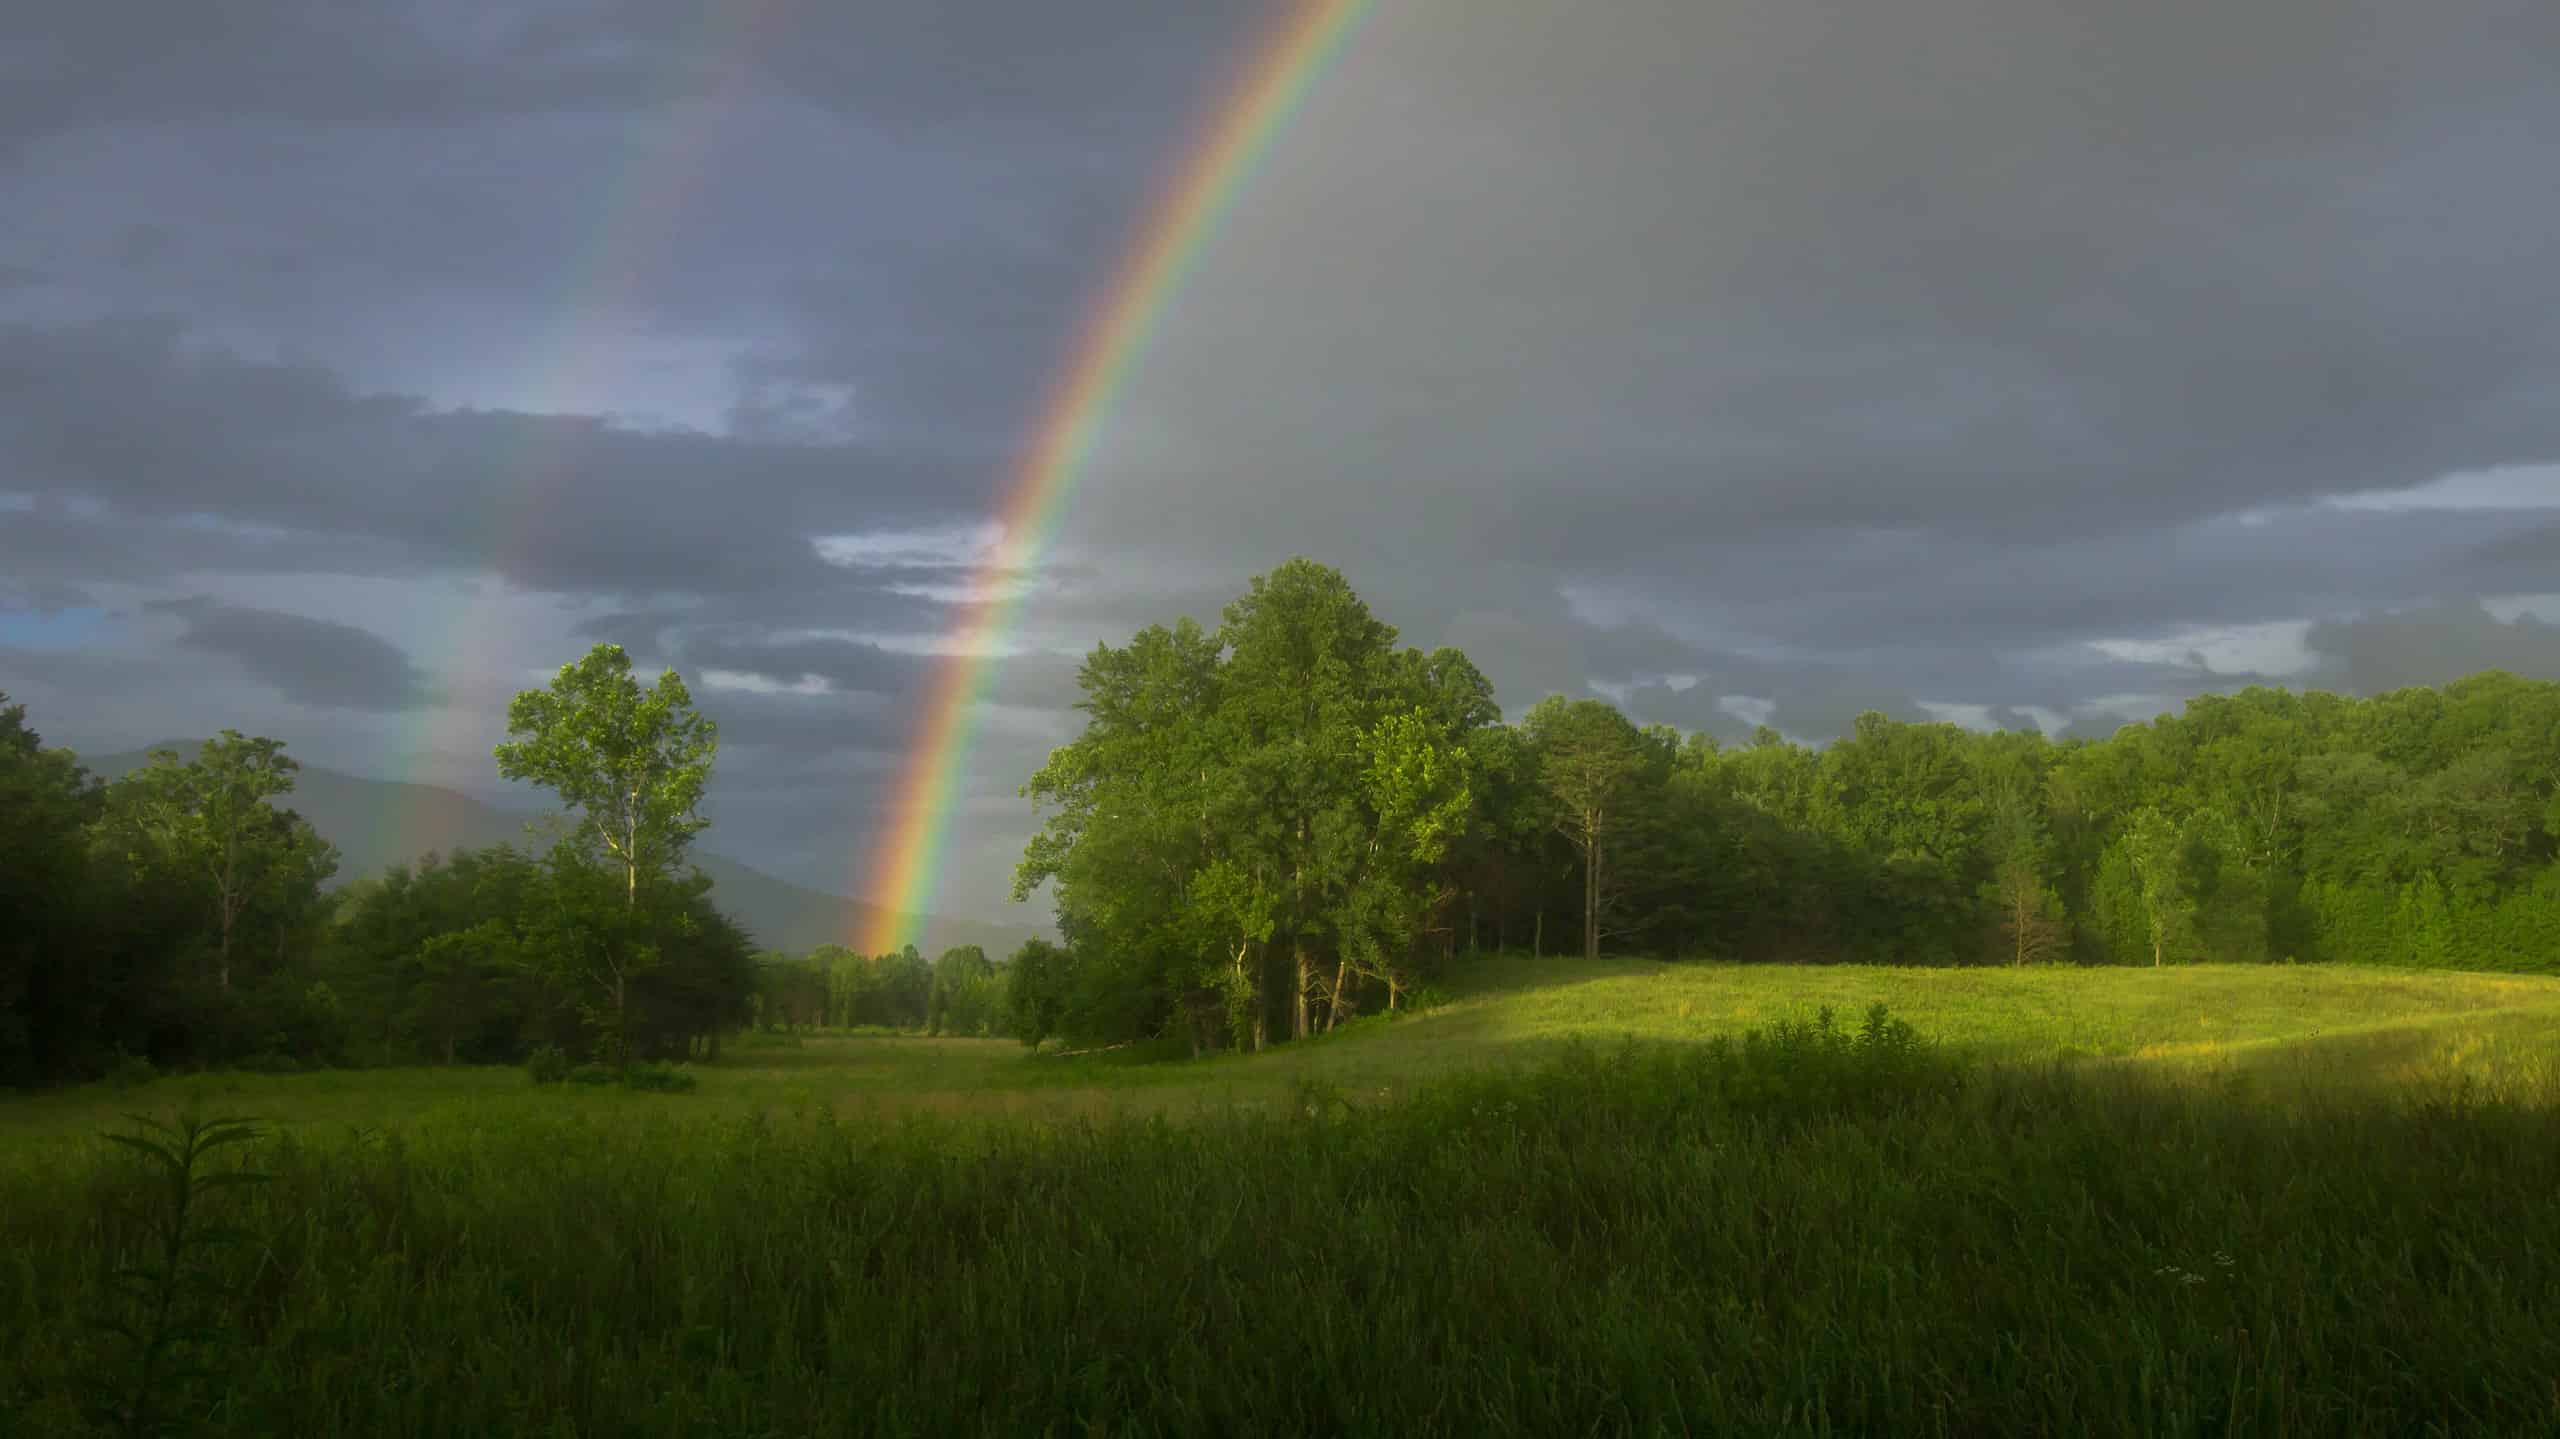 A stunning double rainbow appeared after a rainstorm in Cades Cove in the Great Smoky Mountains National Park.